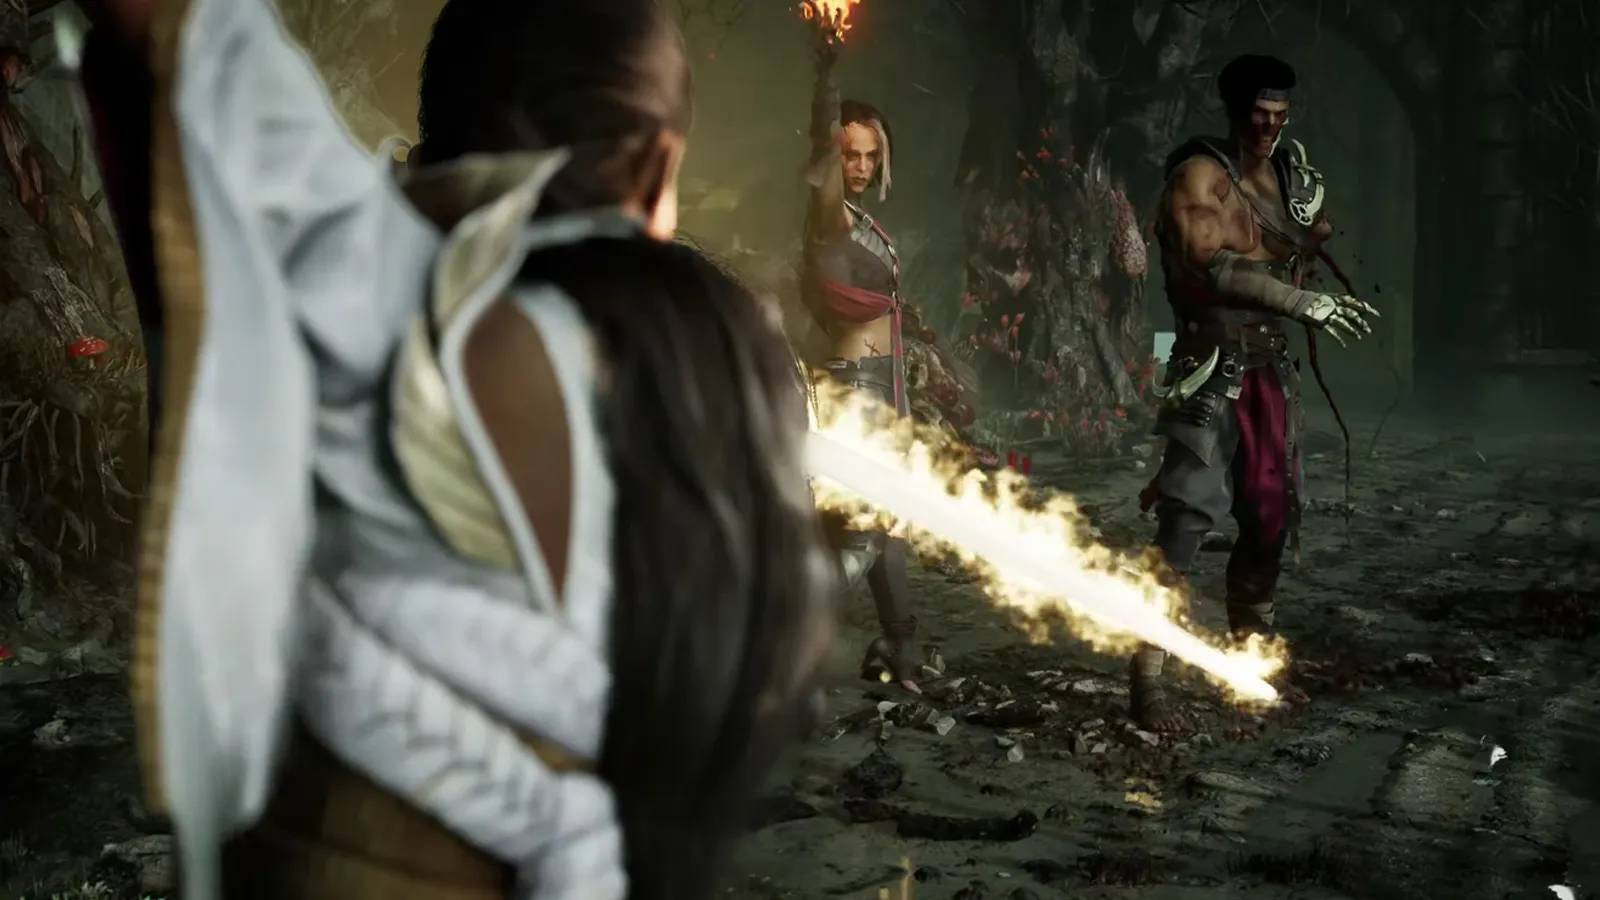 Mortal Kombat 2 Confirms a Fan-Favorite Character for the Live